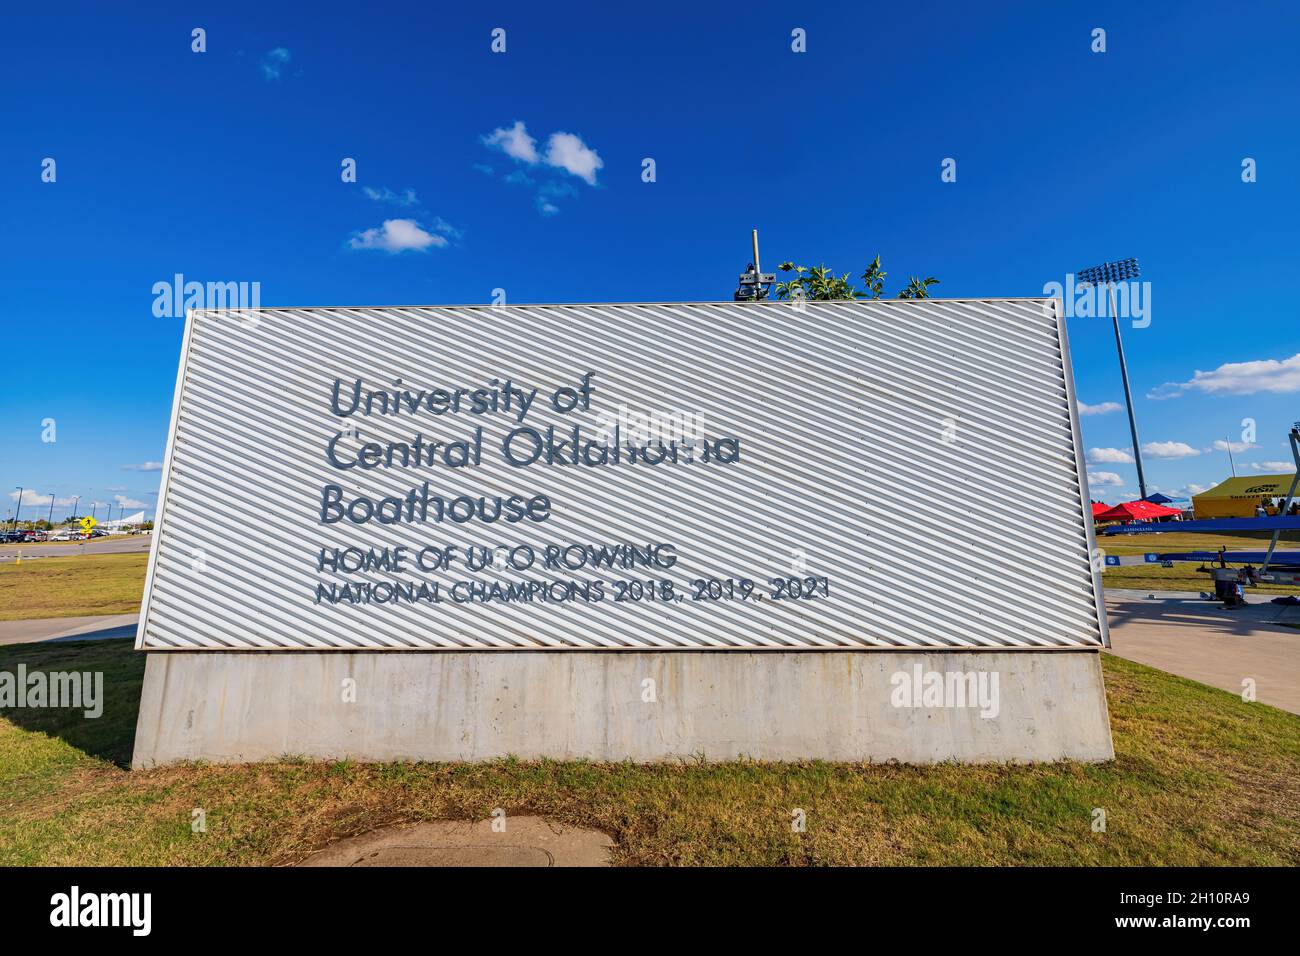 Oklahoma, OCT 2, 2021 - University of Central Oklahoma sign in Boathouse district Stock Photo